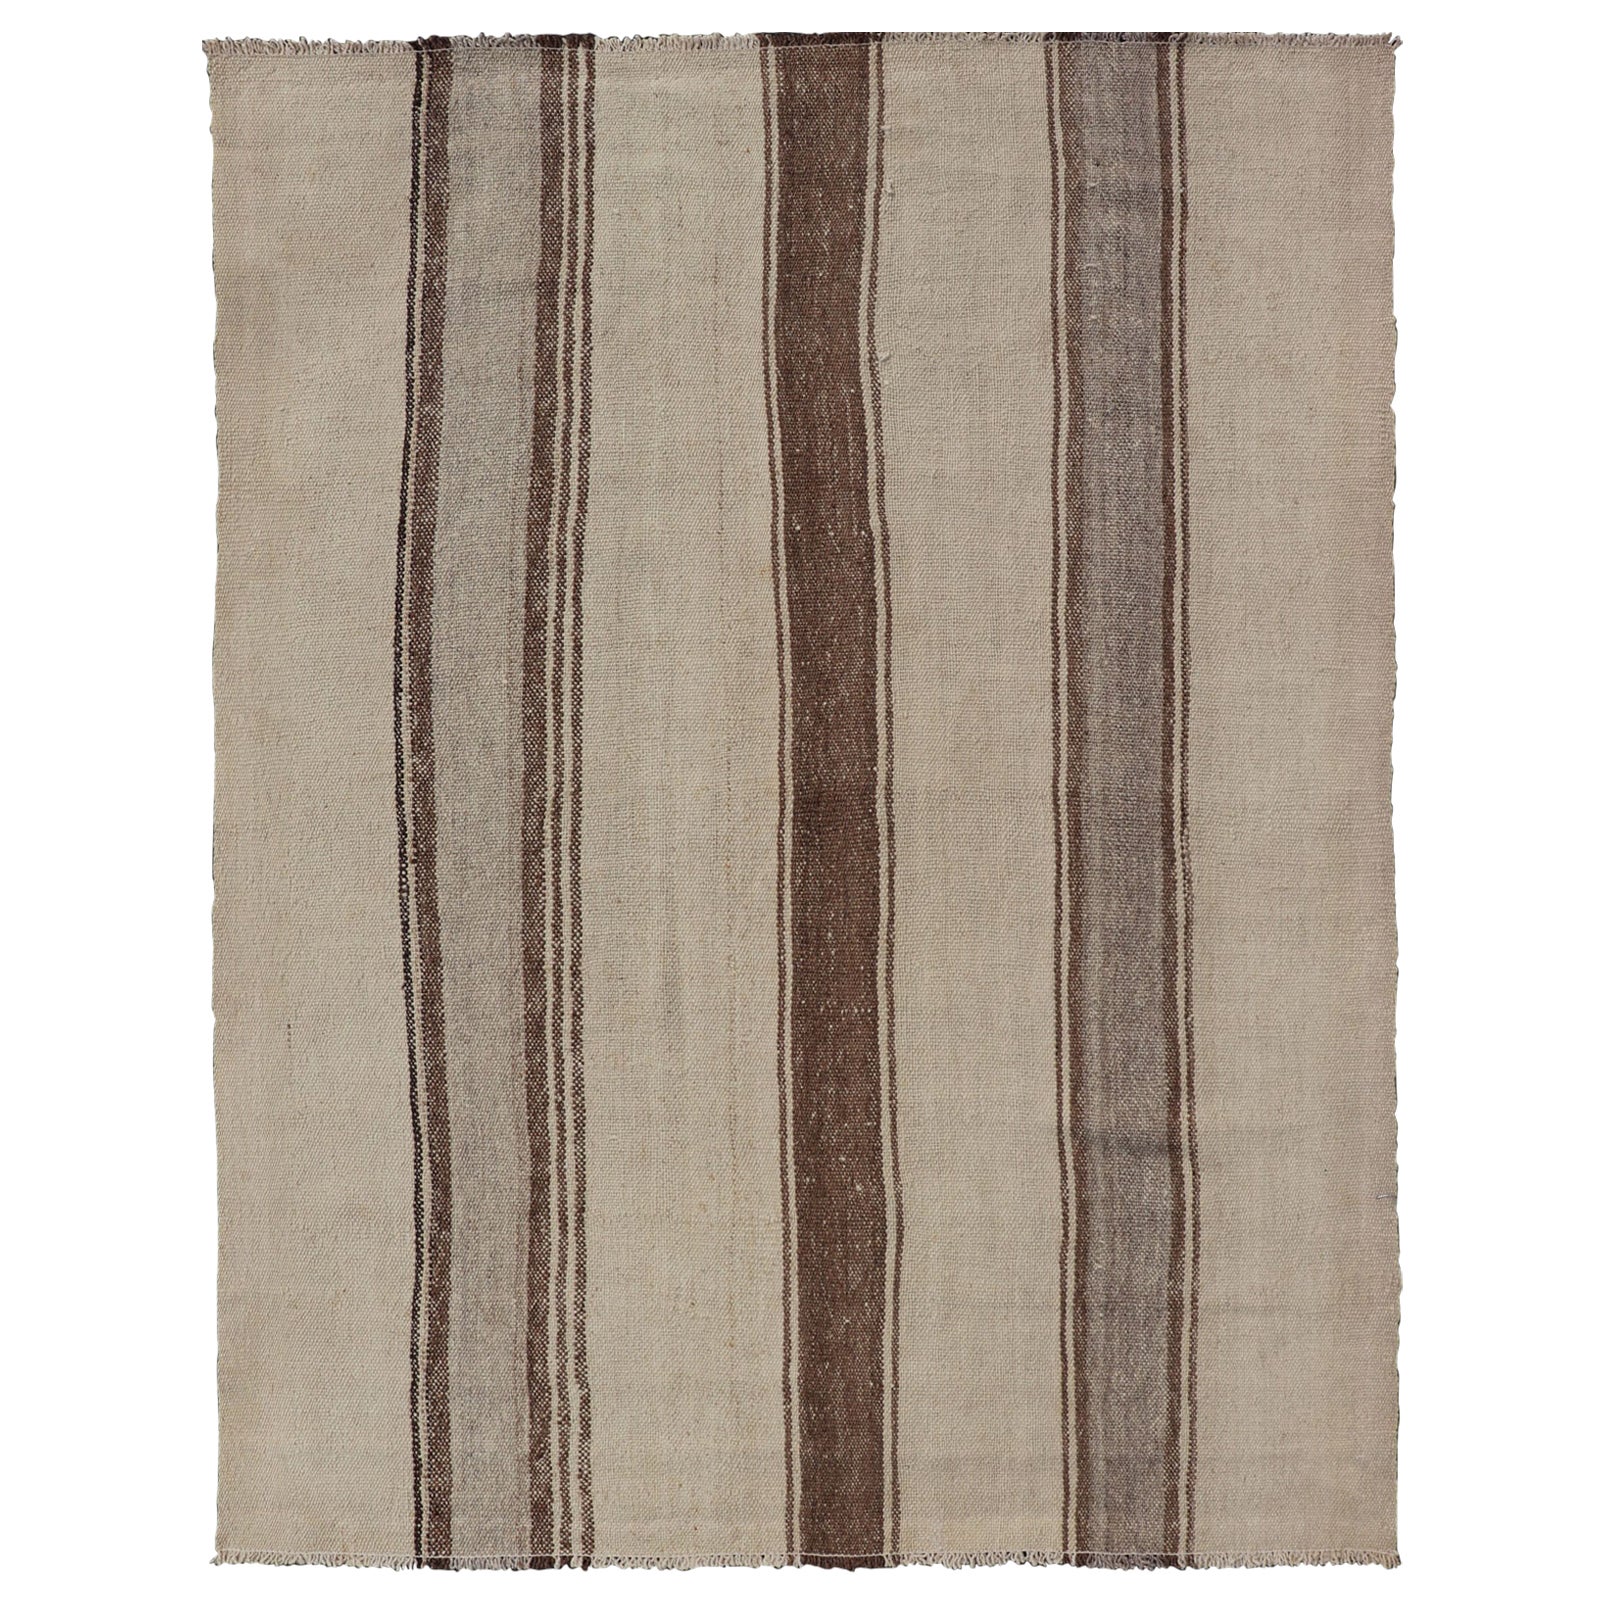 Vintage Turkish Kilim with Vertical Stripes in Tan, Taupe, Grey, Cream and Brown For Sale